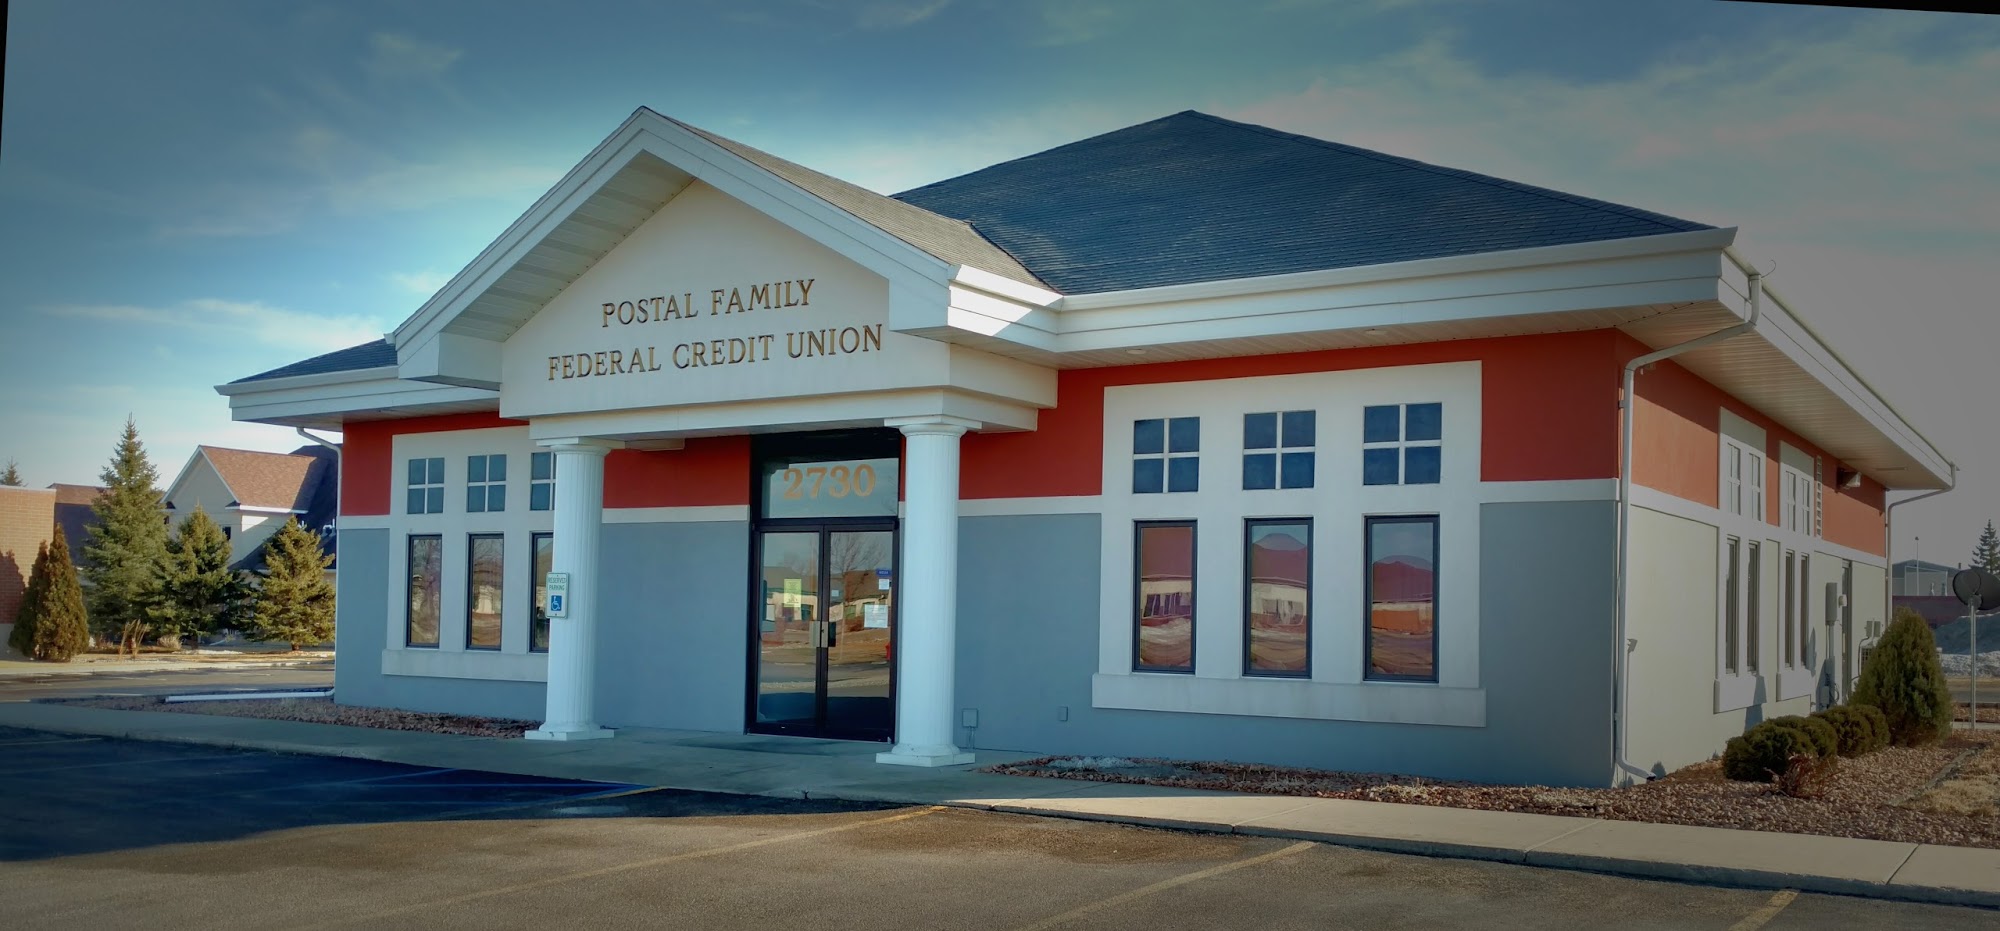 Postal Family Federal Credit Union